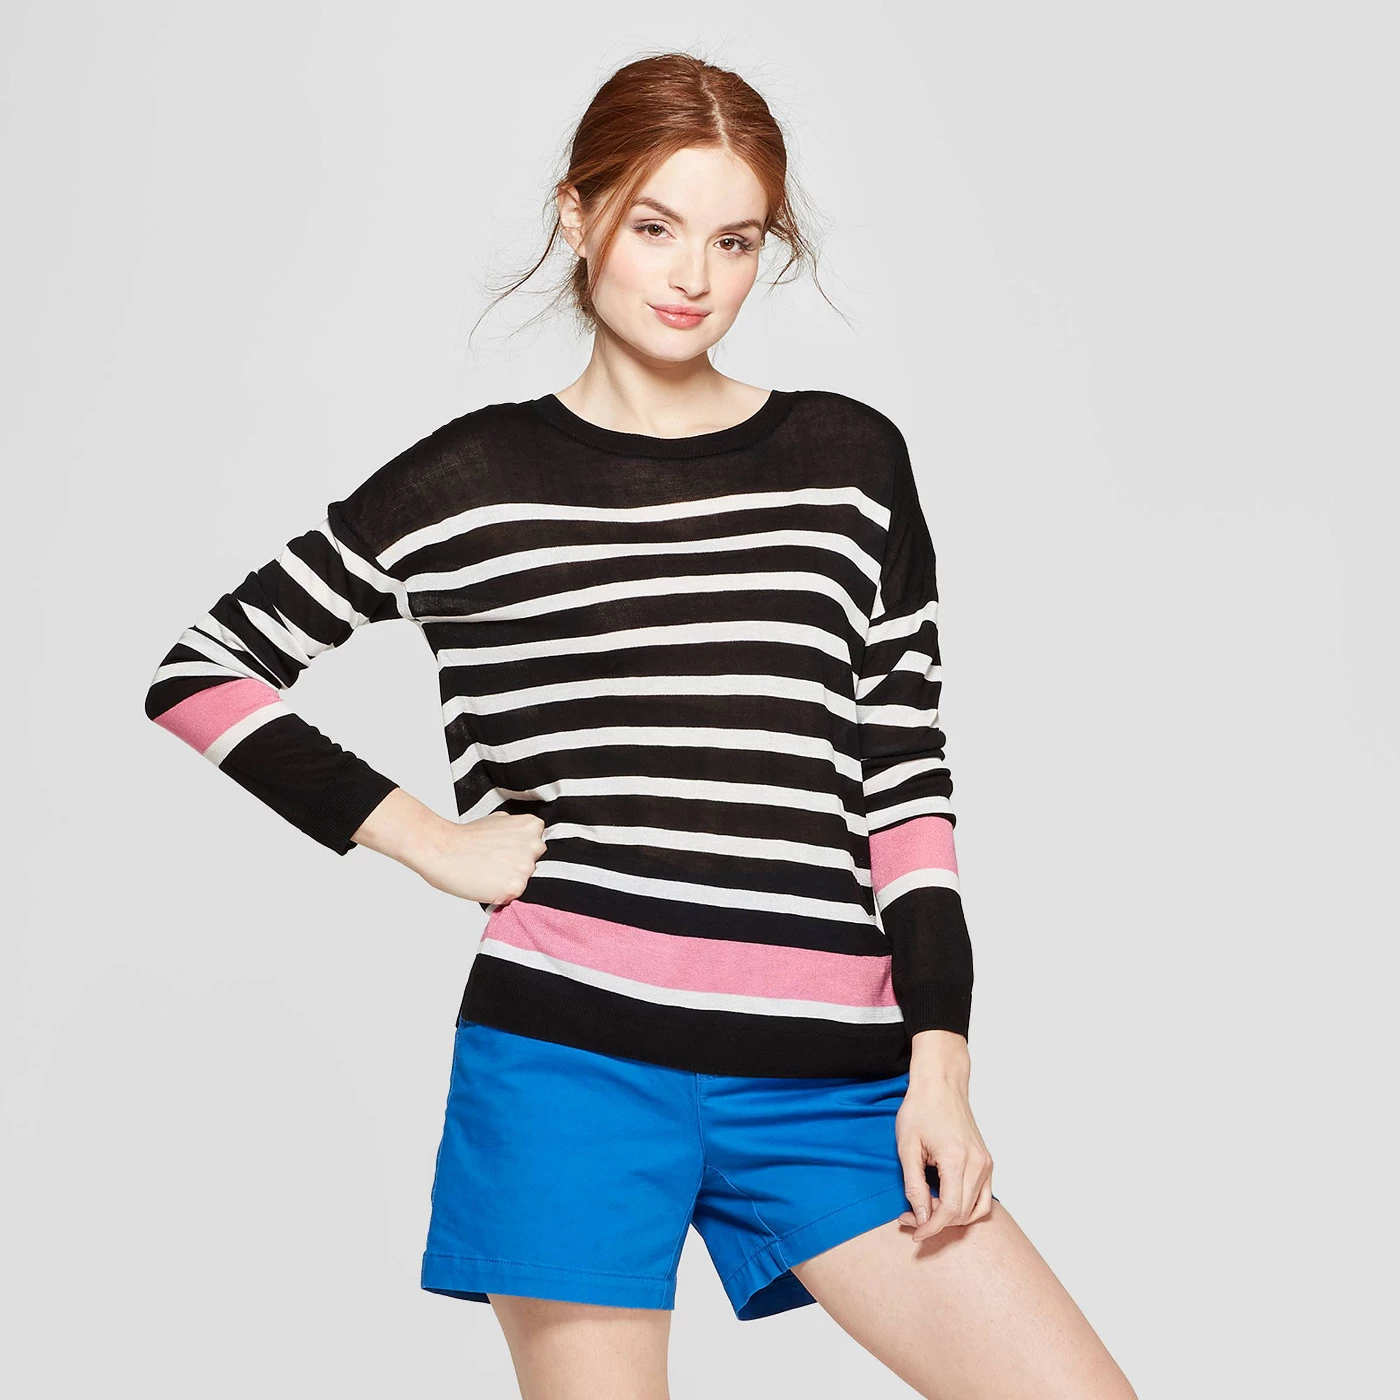 Women's Striped Long Sleeve Crew Neck Pullover Sweater - A New Dayâ„¢ - image 1 of 3